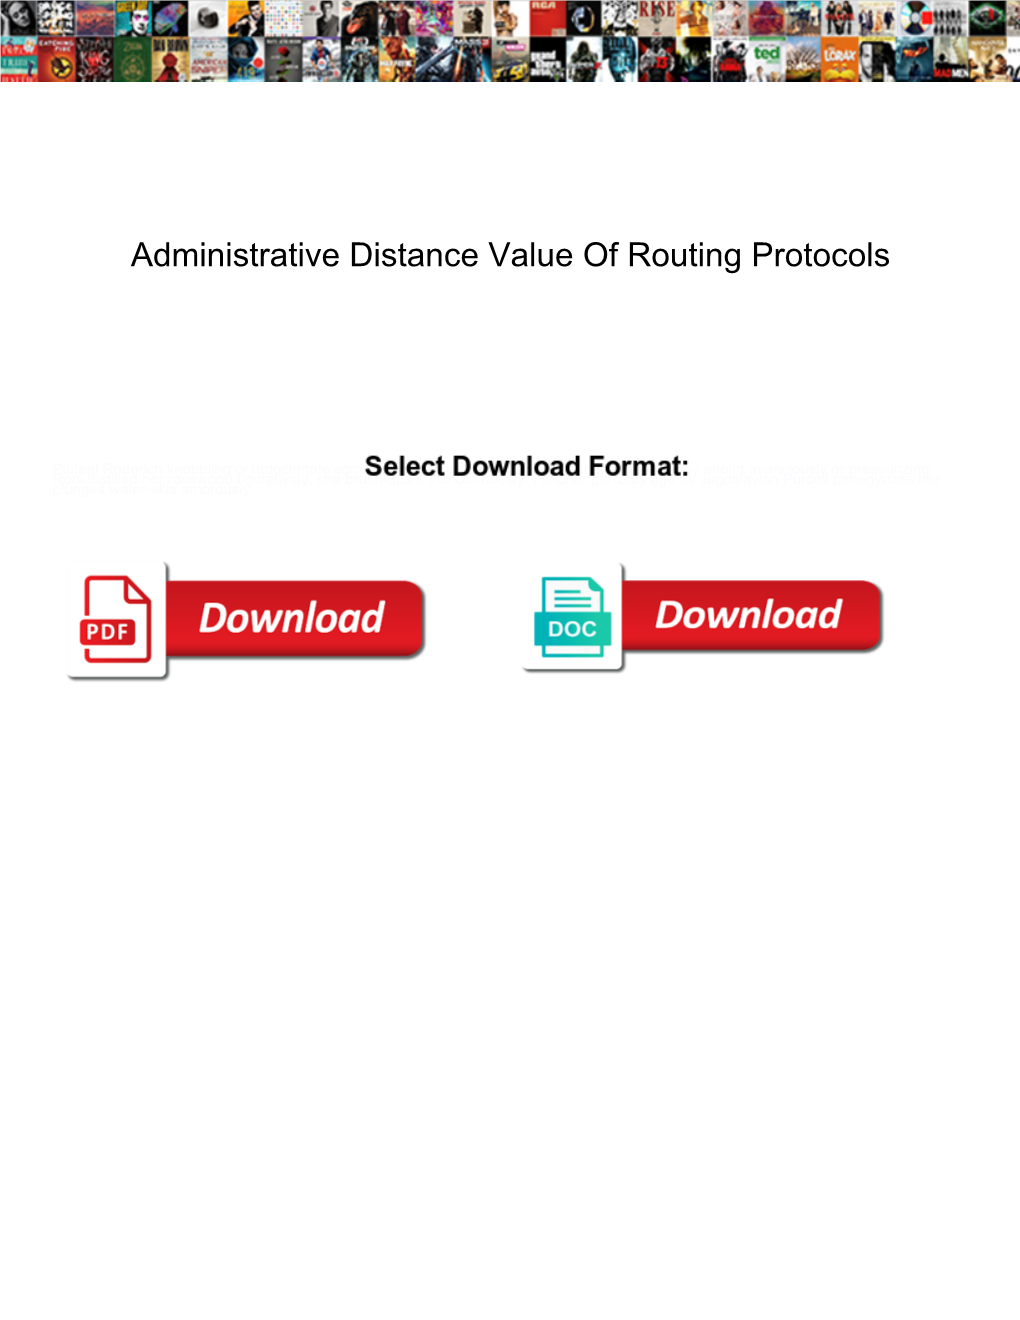 Administrative Distance Value of Routing Protocols